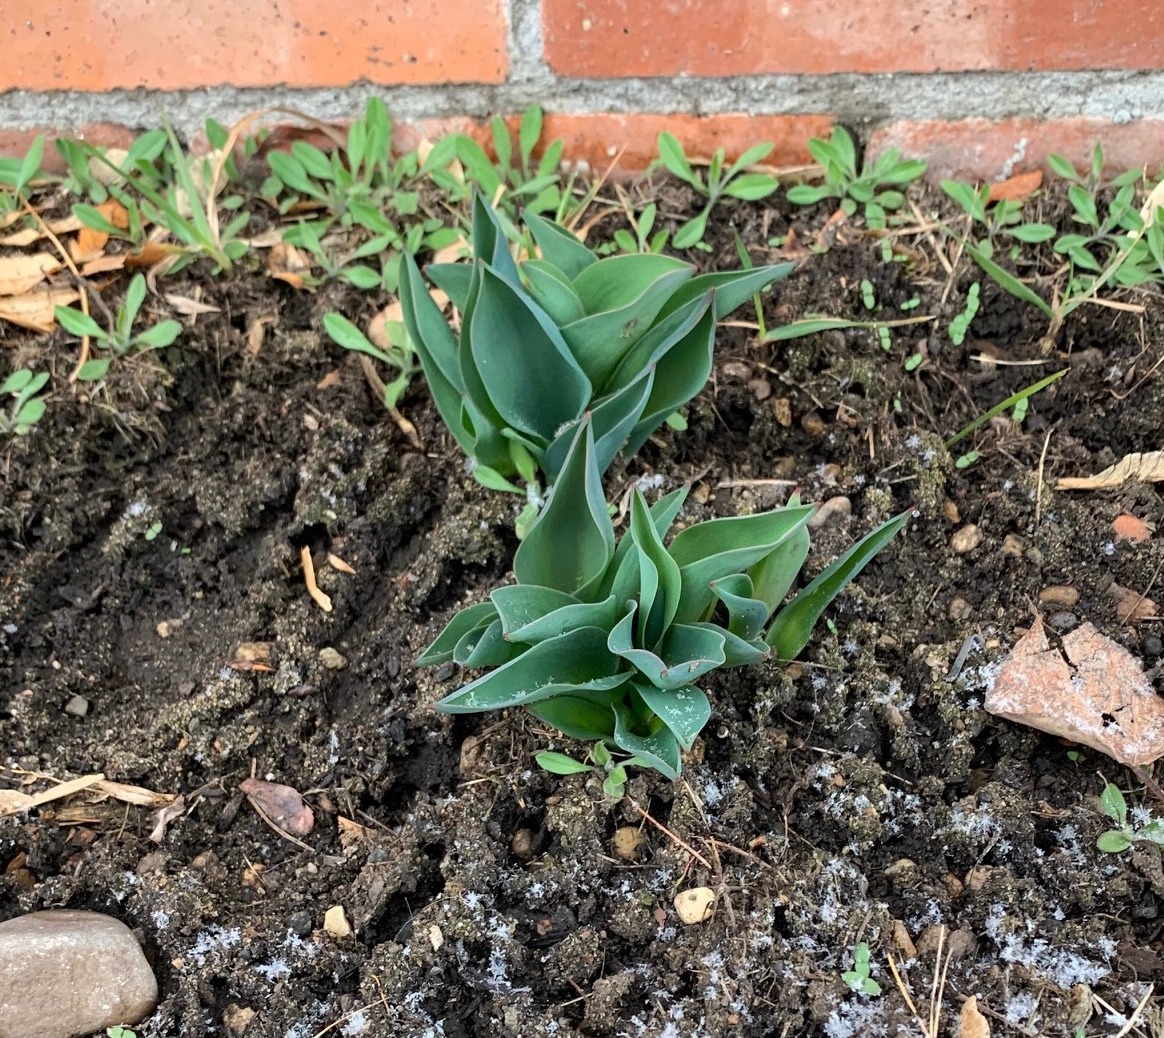 Tate provided this snapshot from his own garden—tulips pushing out of the frost-covered ground, a metaphor, he says, of human resiliency.